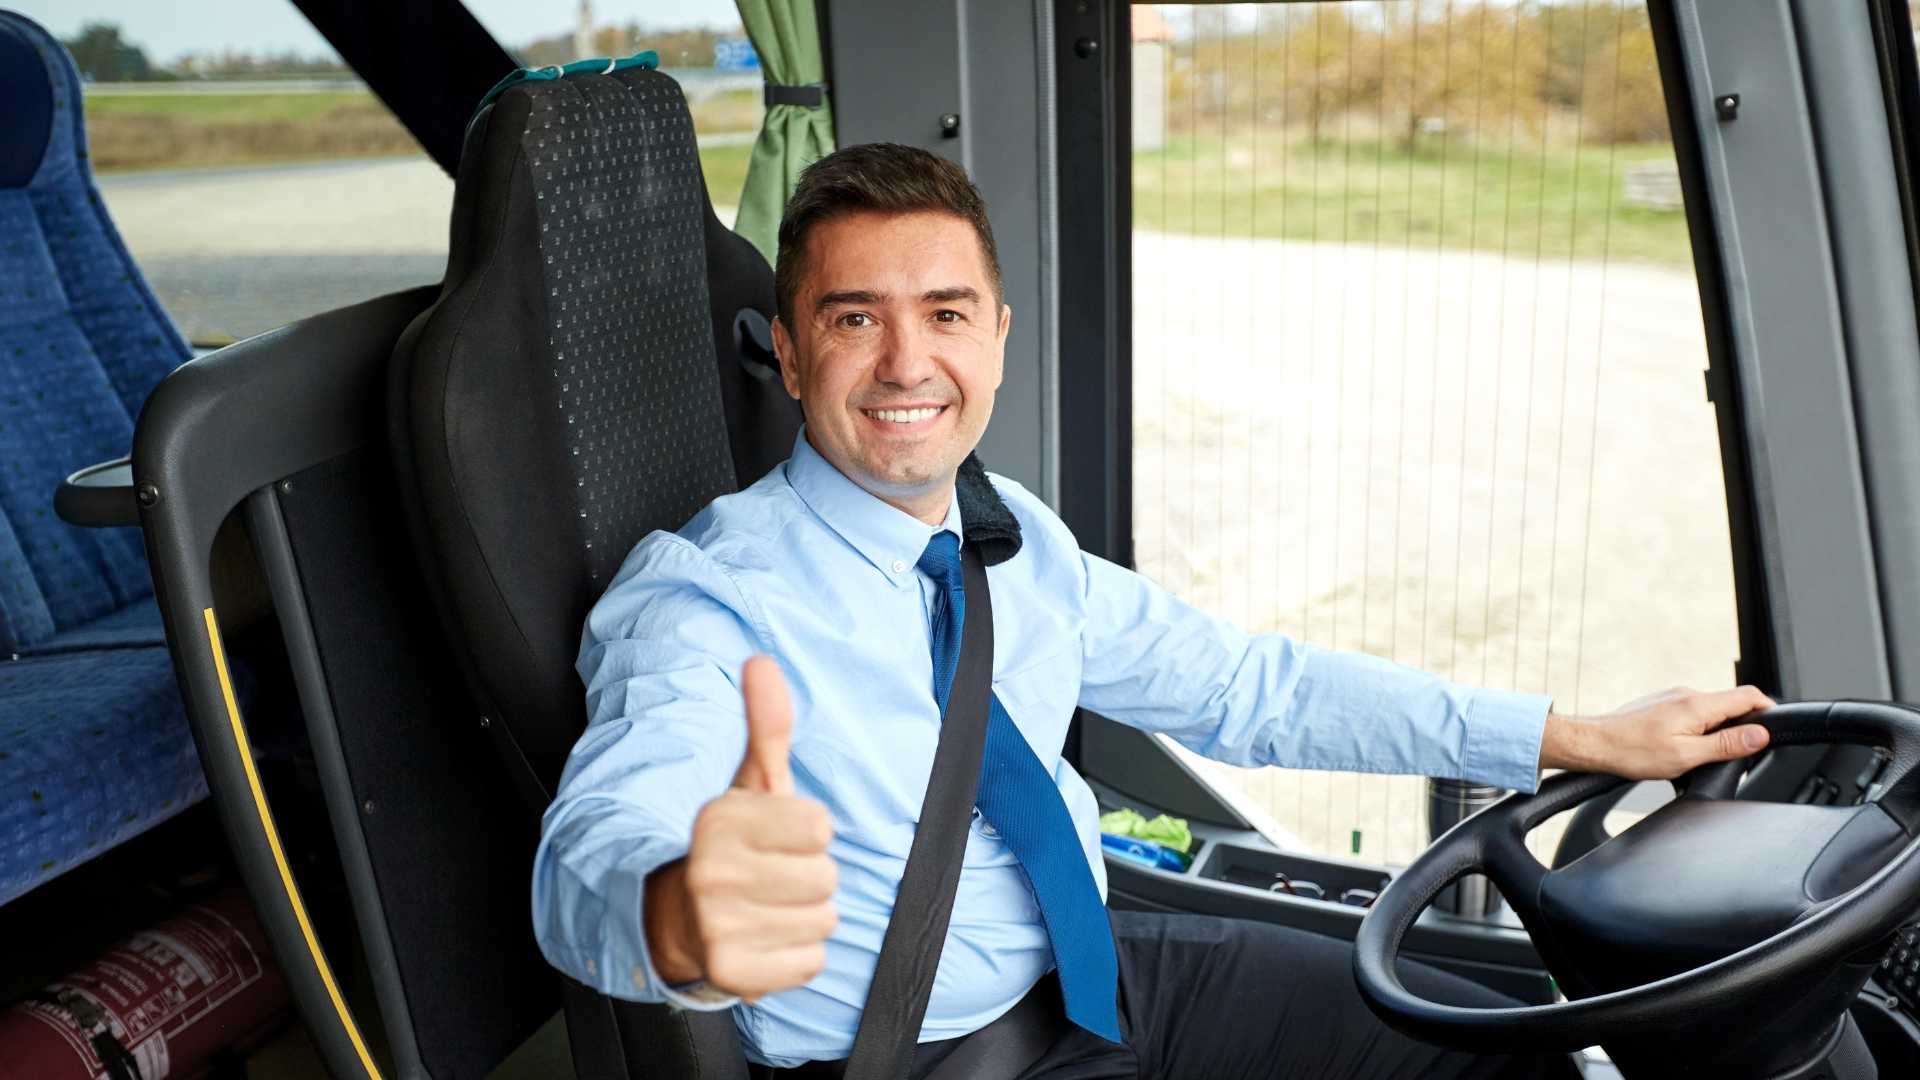 Trainee Bus Driver